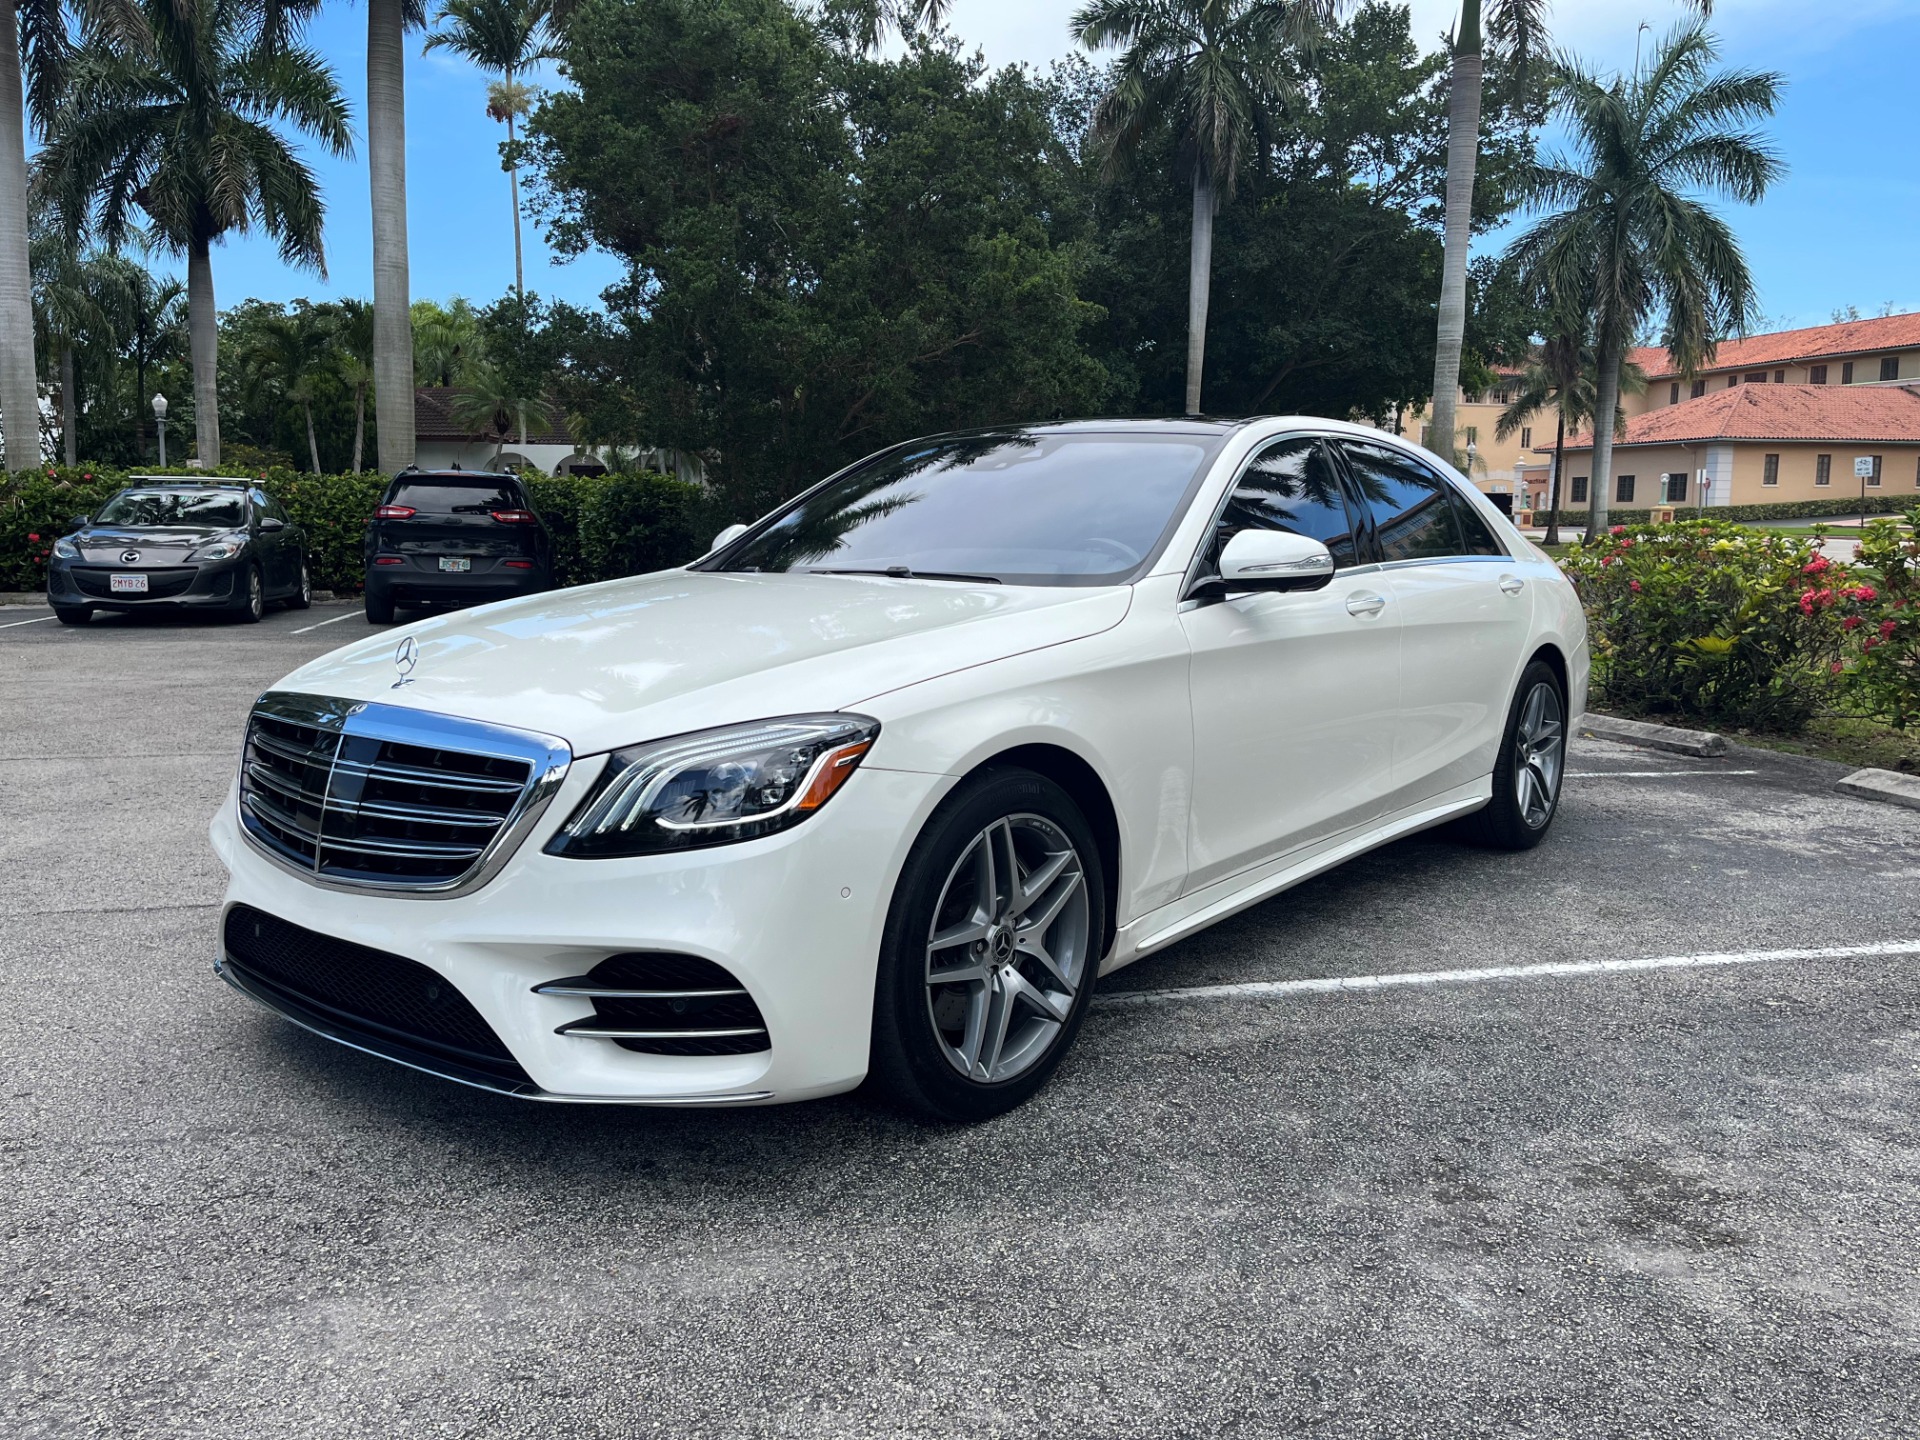 Used 2019 Mercedes-Benz S-Class S 560 4MATIC for sale $76,499 at The Gables Sports Cars in Miami FL 33146 3